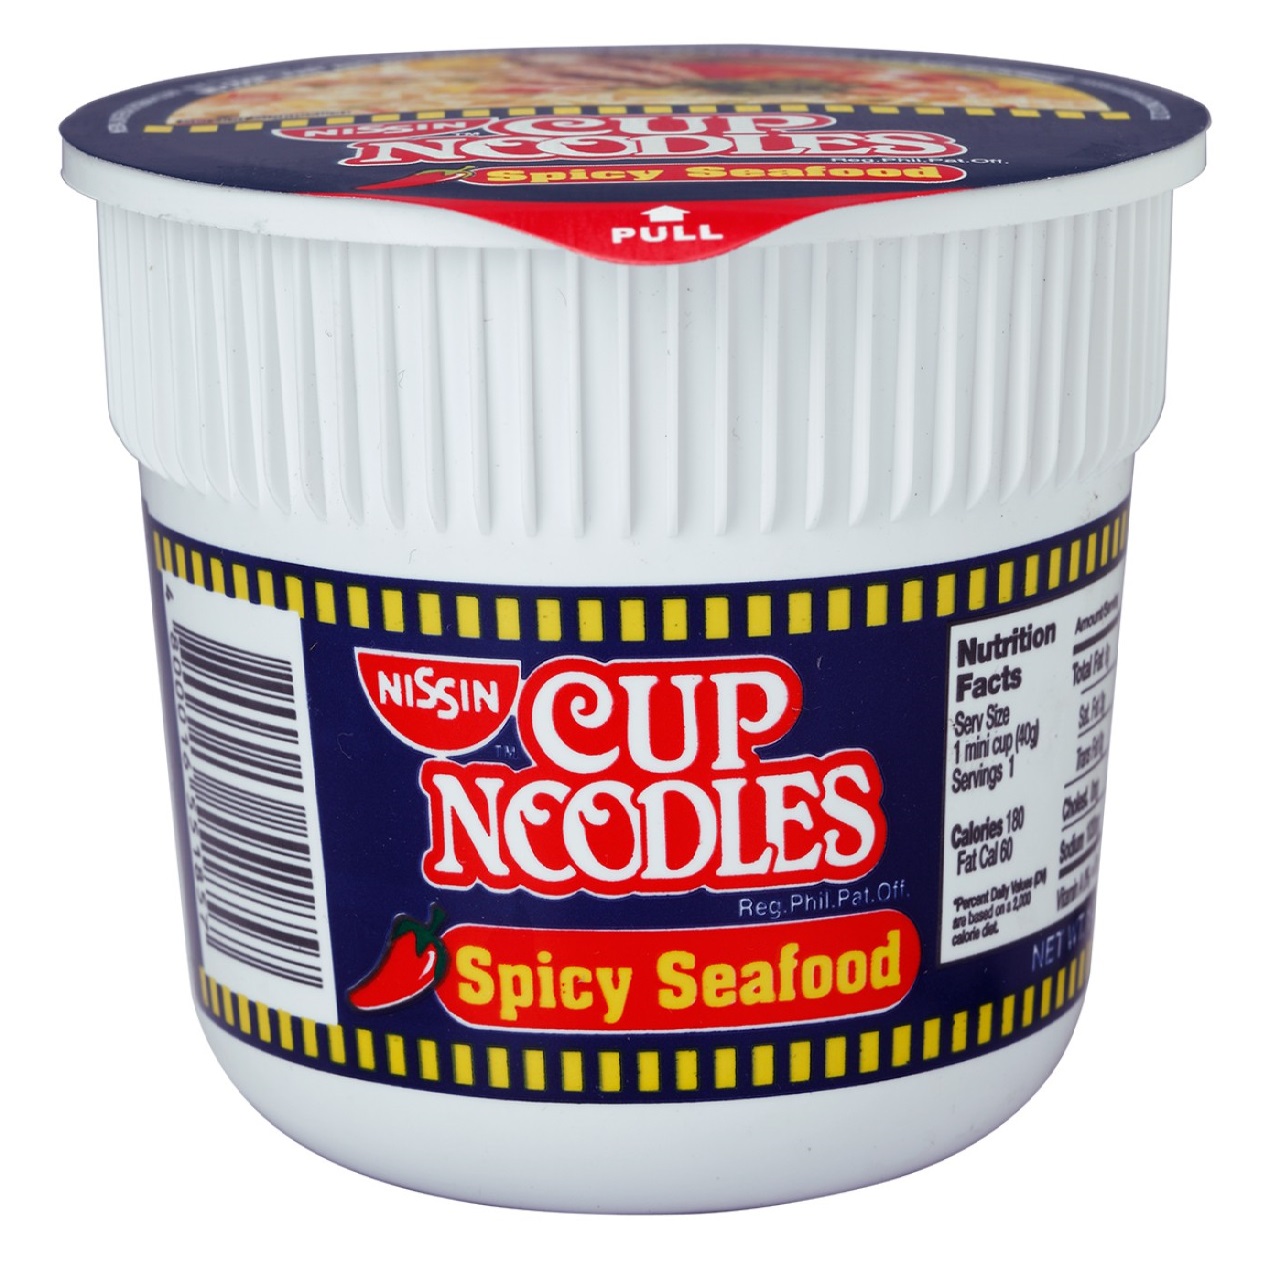 https://www.mustakshif.com/public/uploads/products/nissin-nissin-nissin-mini-cup-noodles-spicy-seafoods-40g-ingredient-missing_4800016551857_Mustakshif.jpg